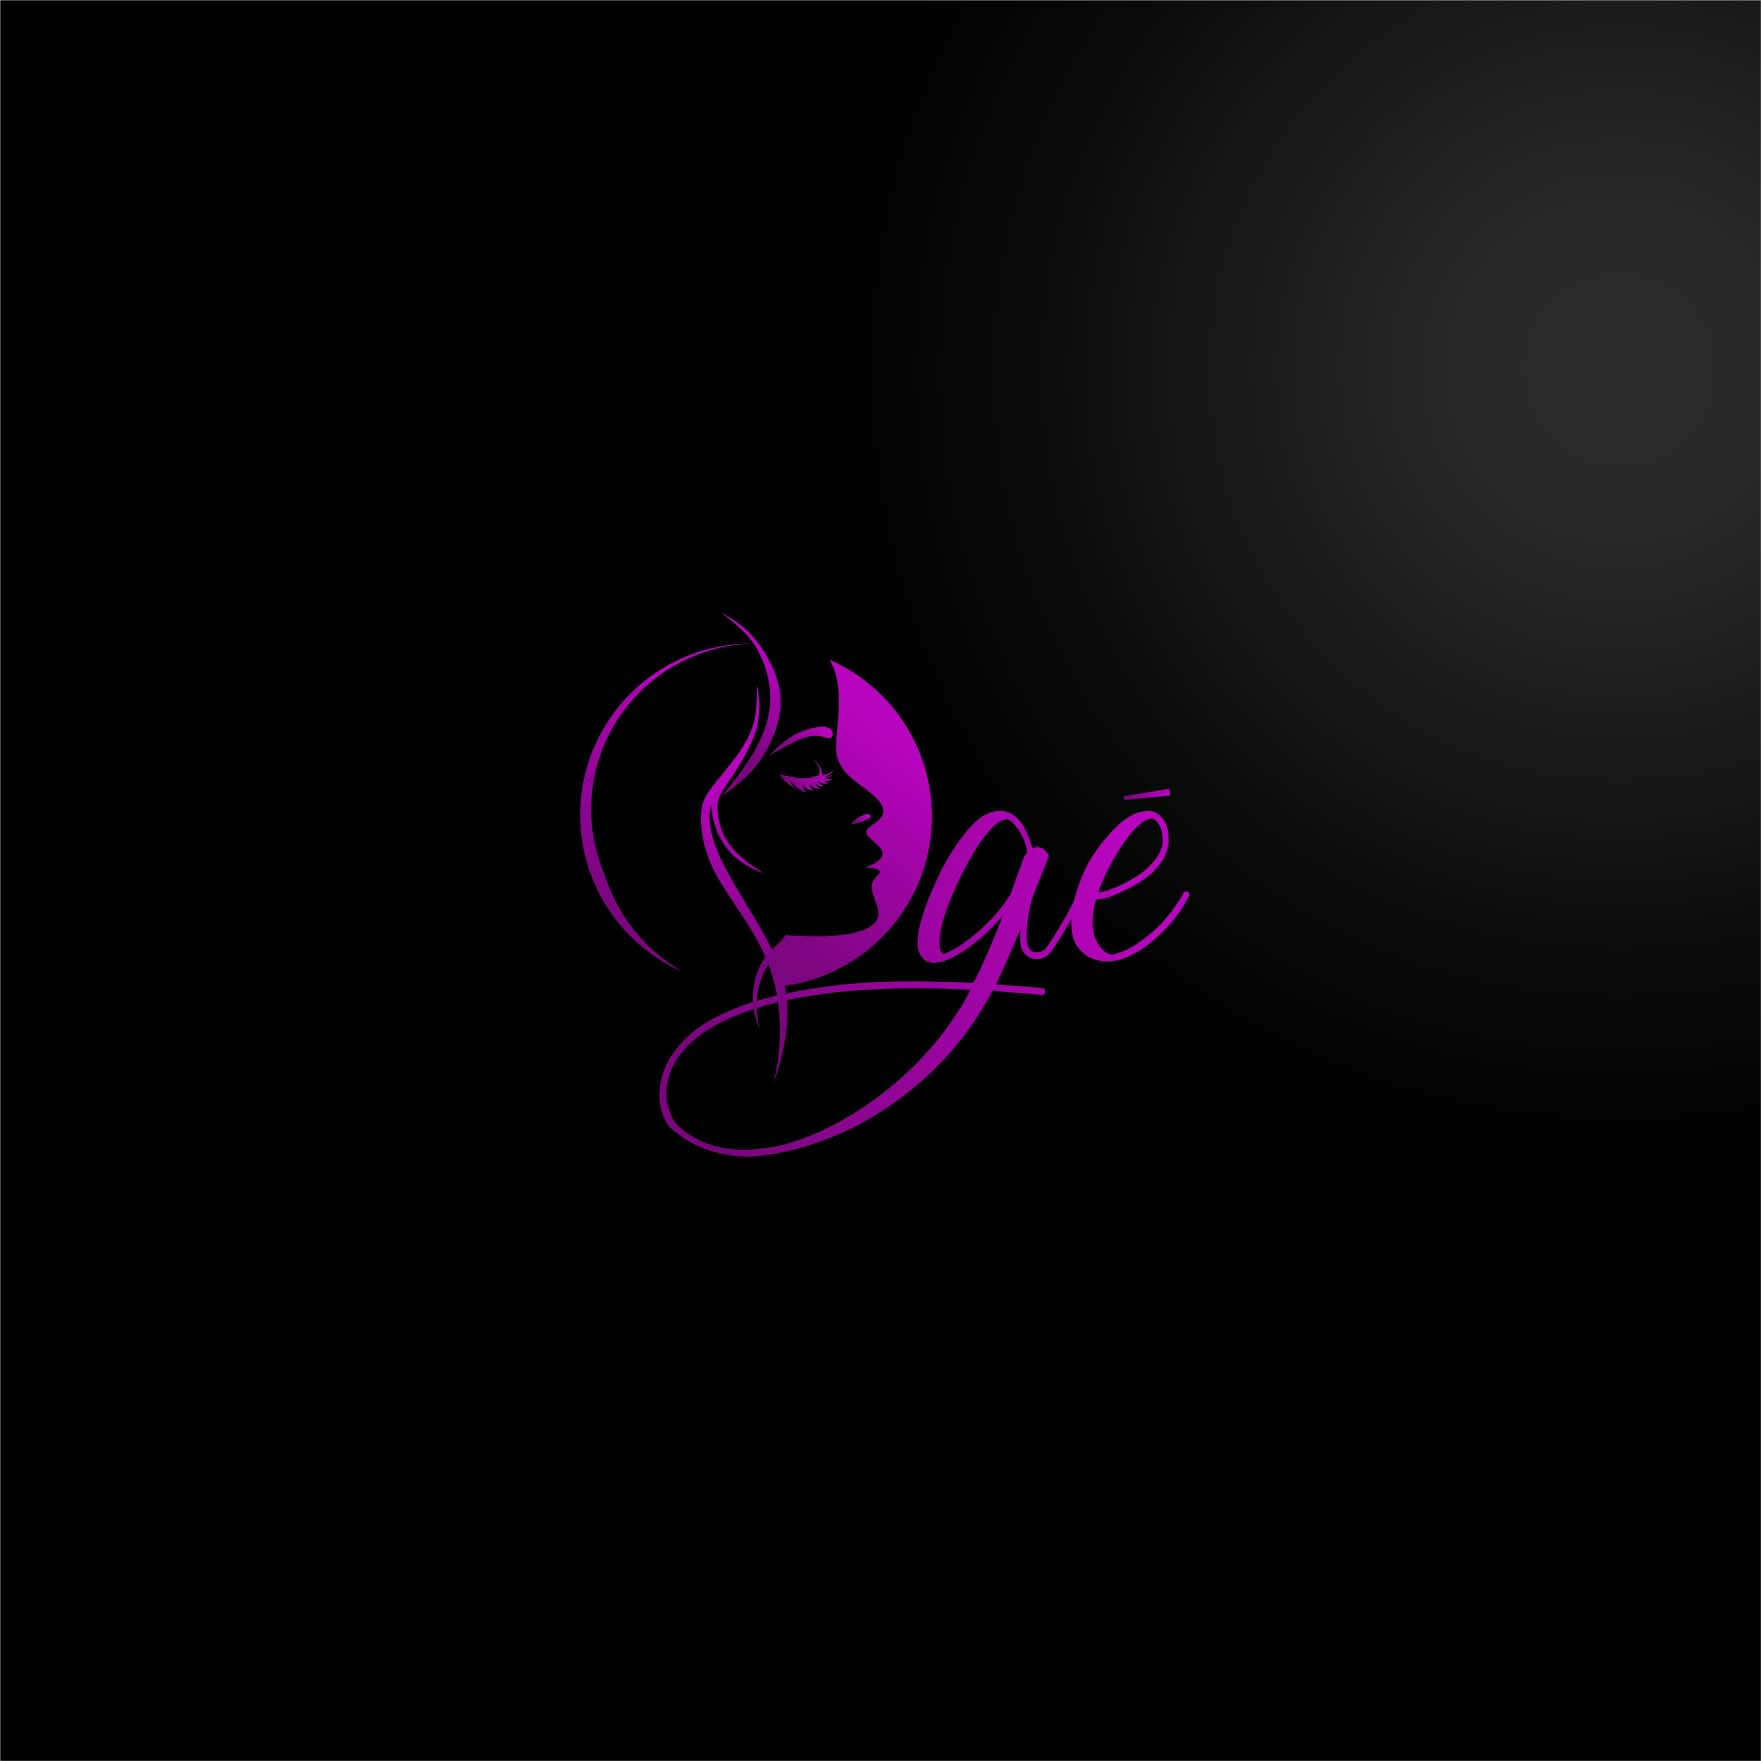 Oge Logo Design - A Beauty Brand For Ladies